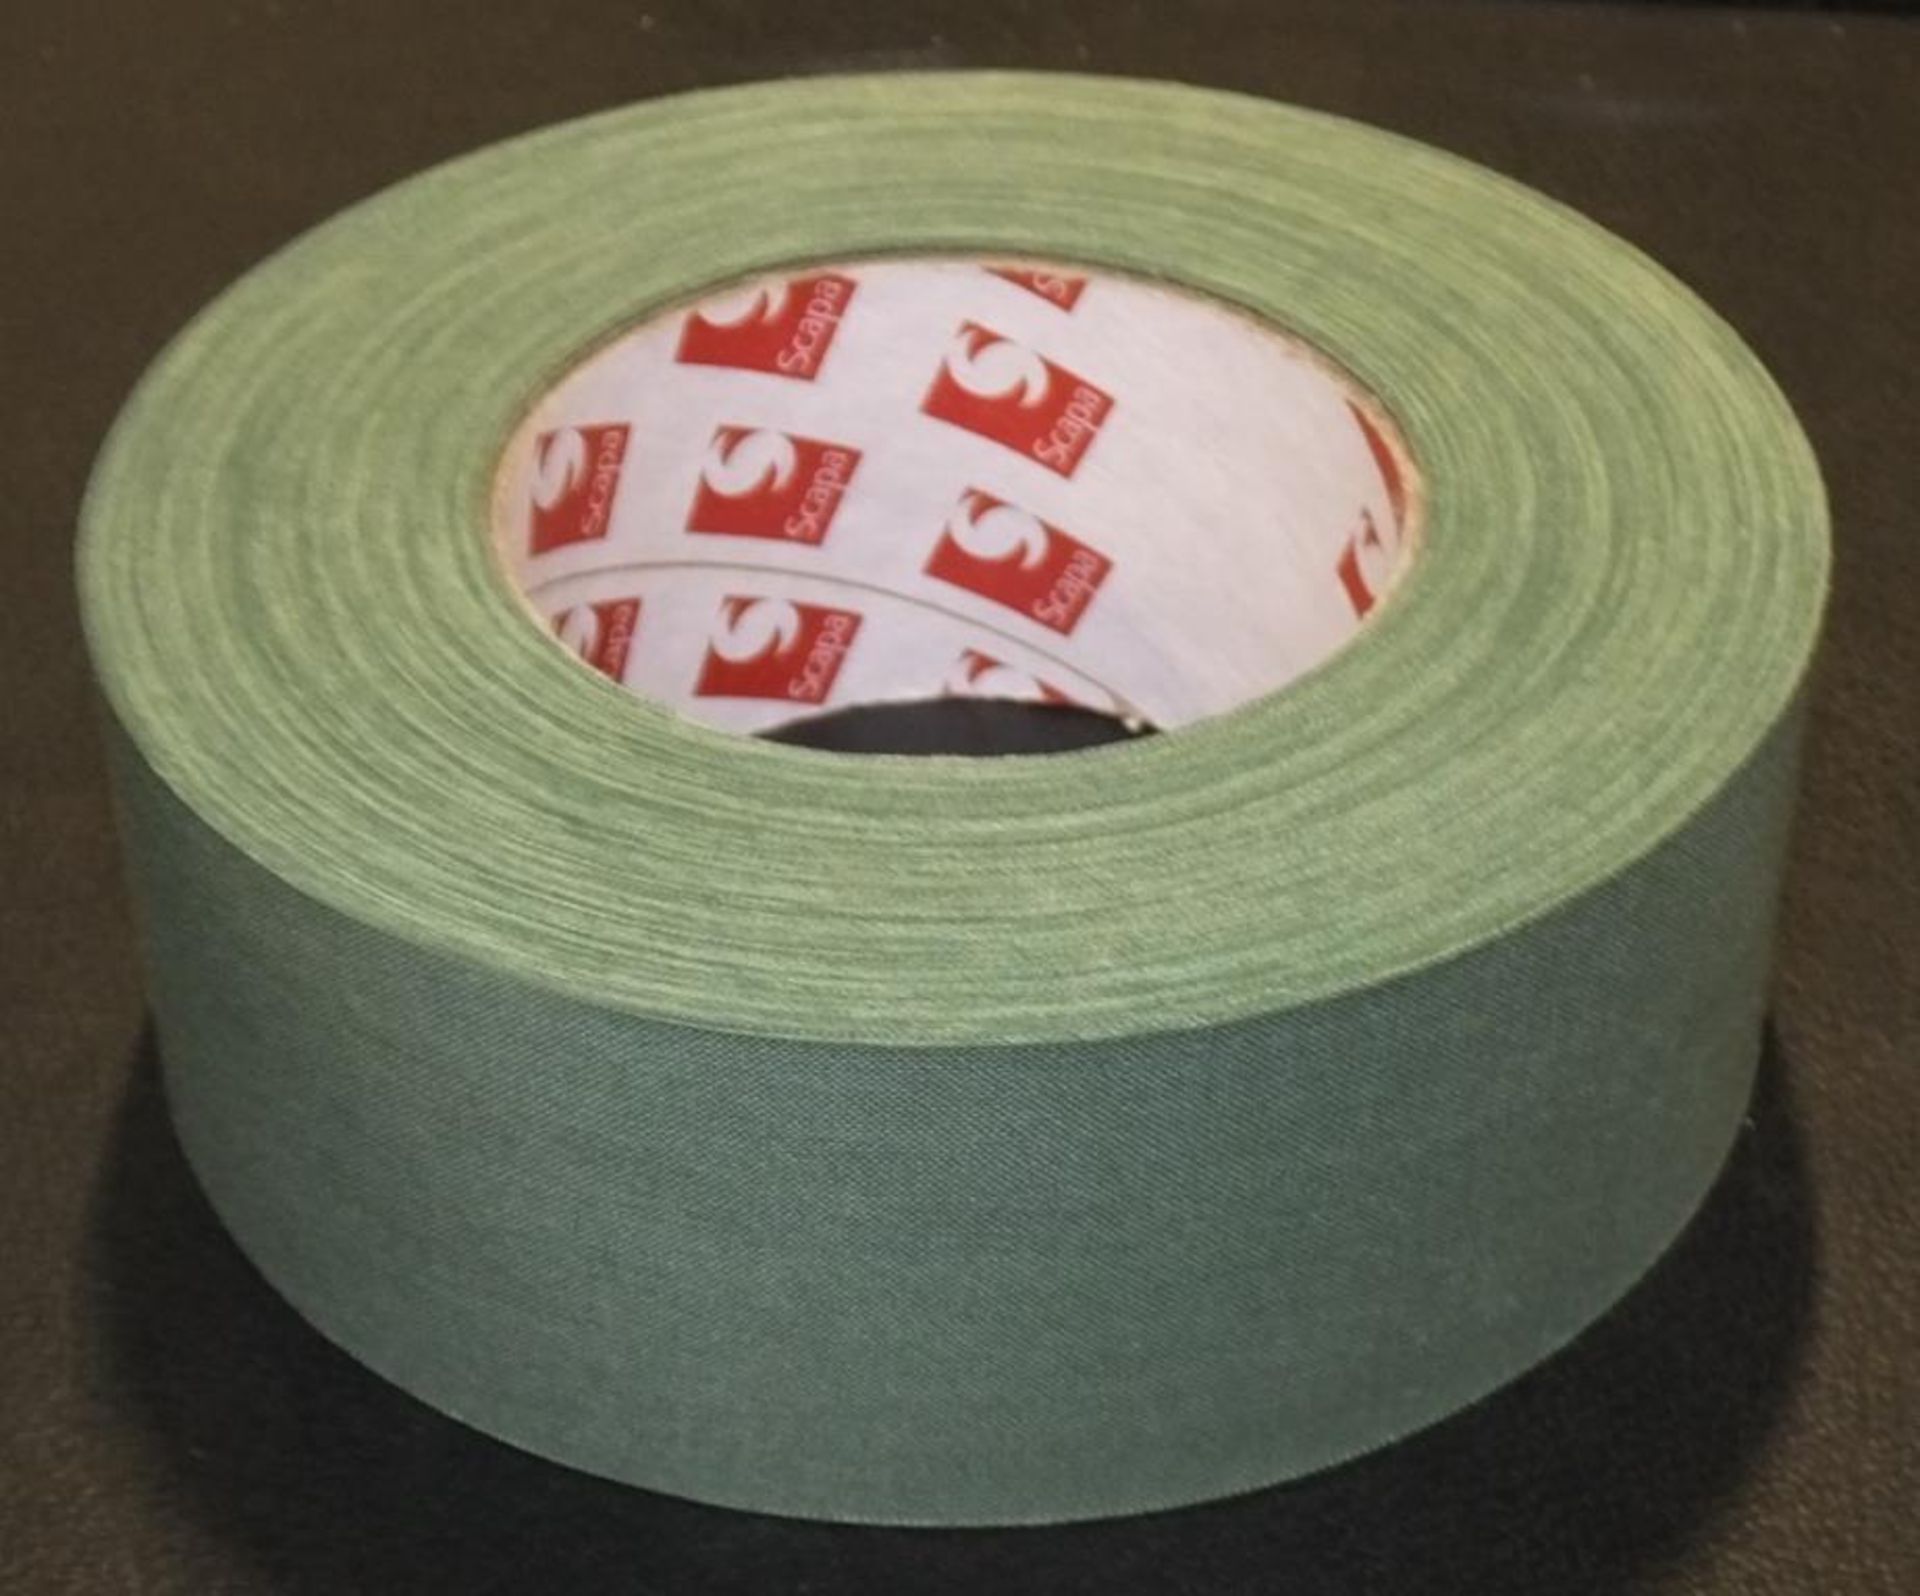 Scapa Cloth Adhesive Tape - Olive Green - 16 Rolls Per Box - 3 boxes - Image 2 of 2